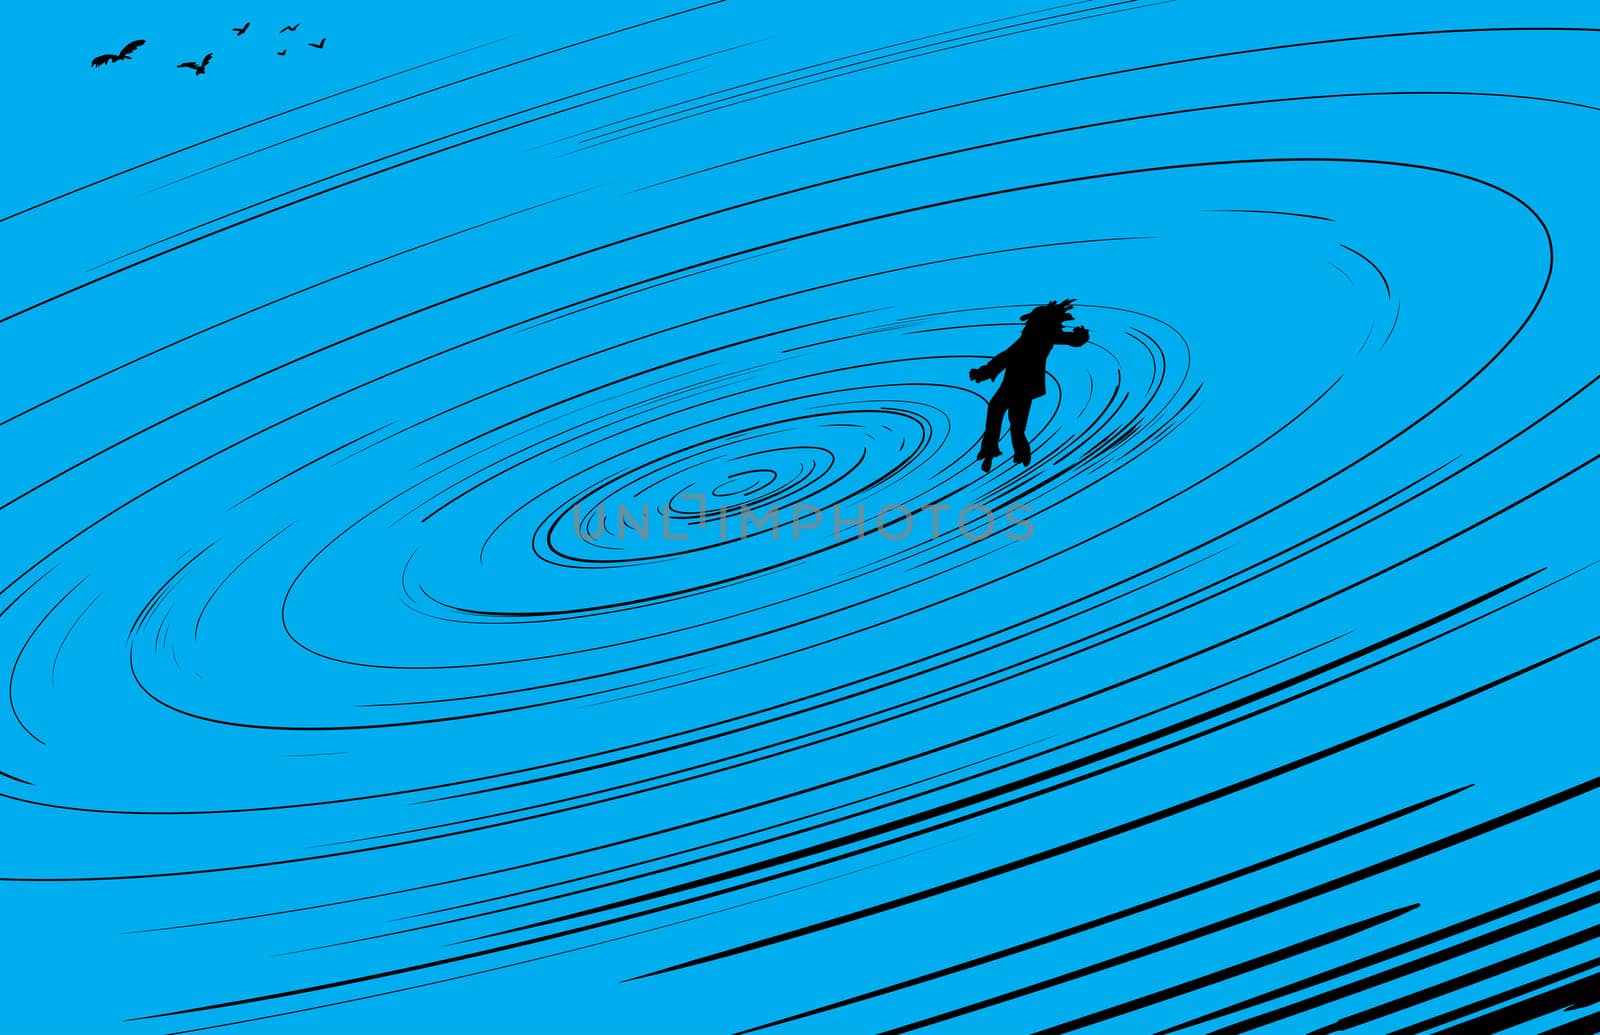 Single person floating in center of blue vortex  with flock of birds nearby